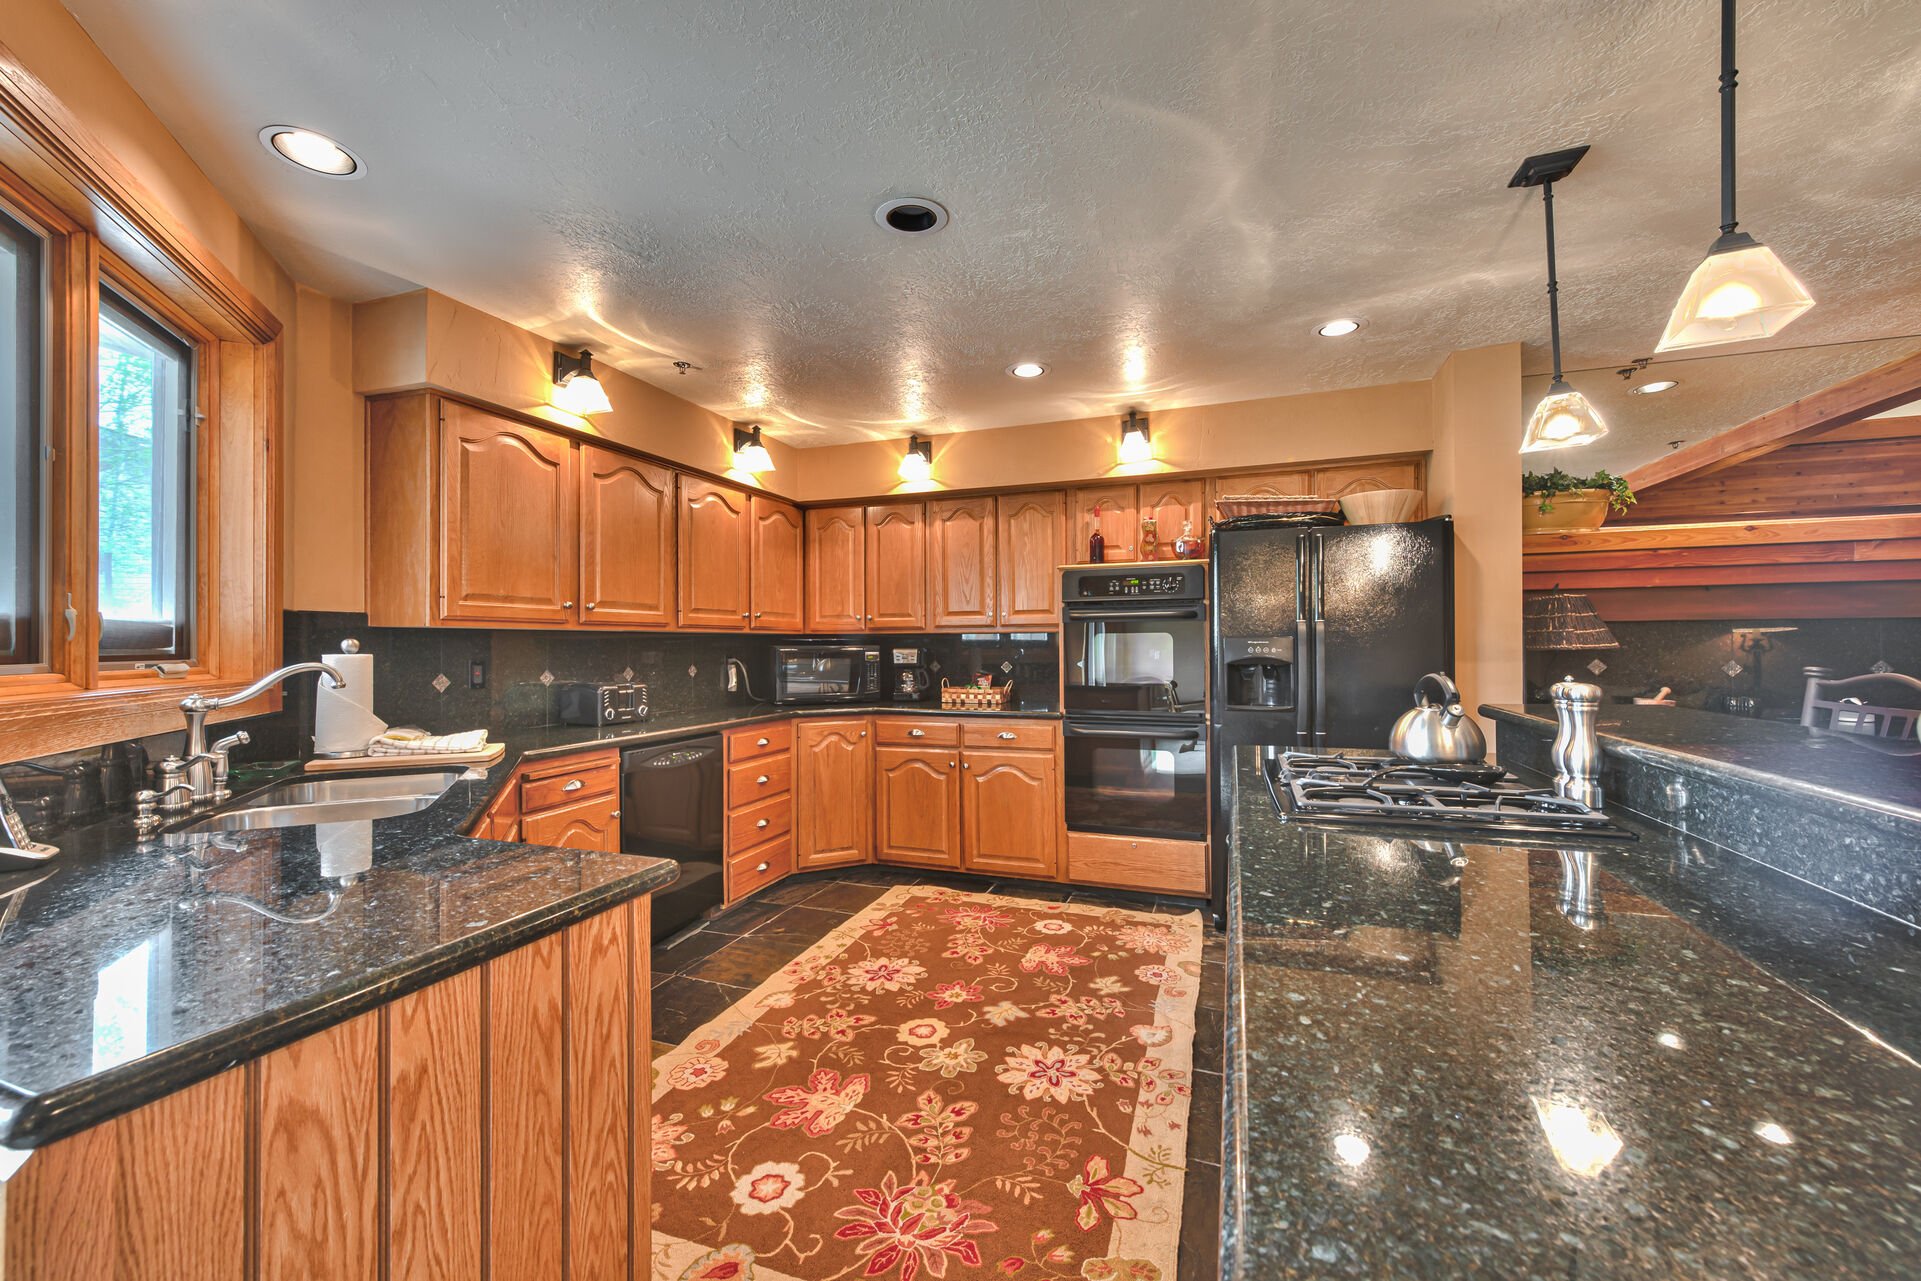 Fully Equipped Kitchen with a 4-Burner Gas Stove, Double Ovens, Granite Counter Tops, and Stone Tile Flooring